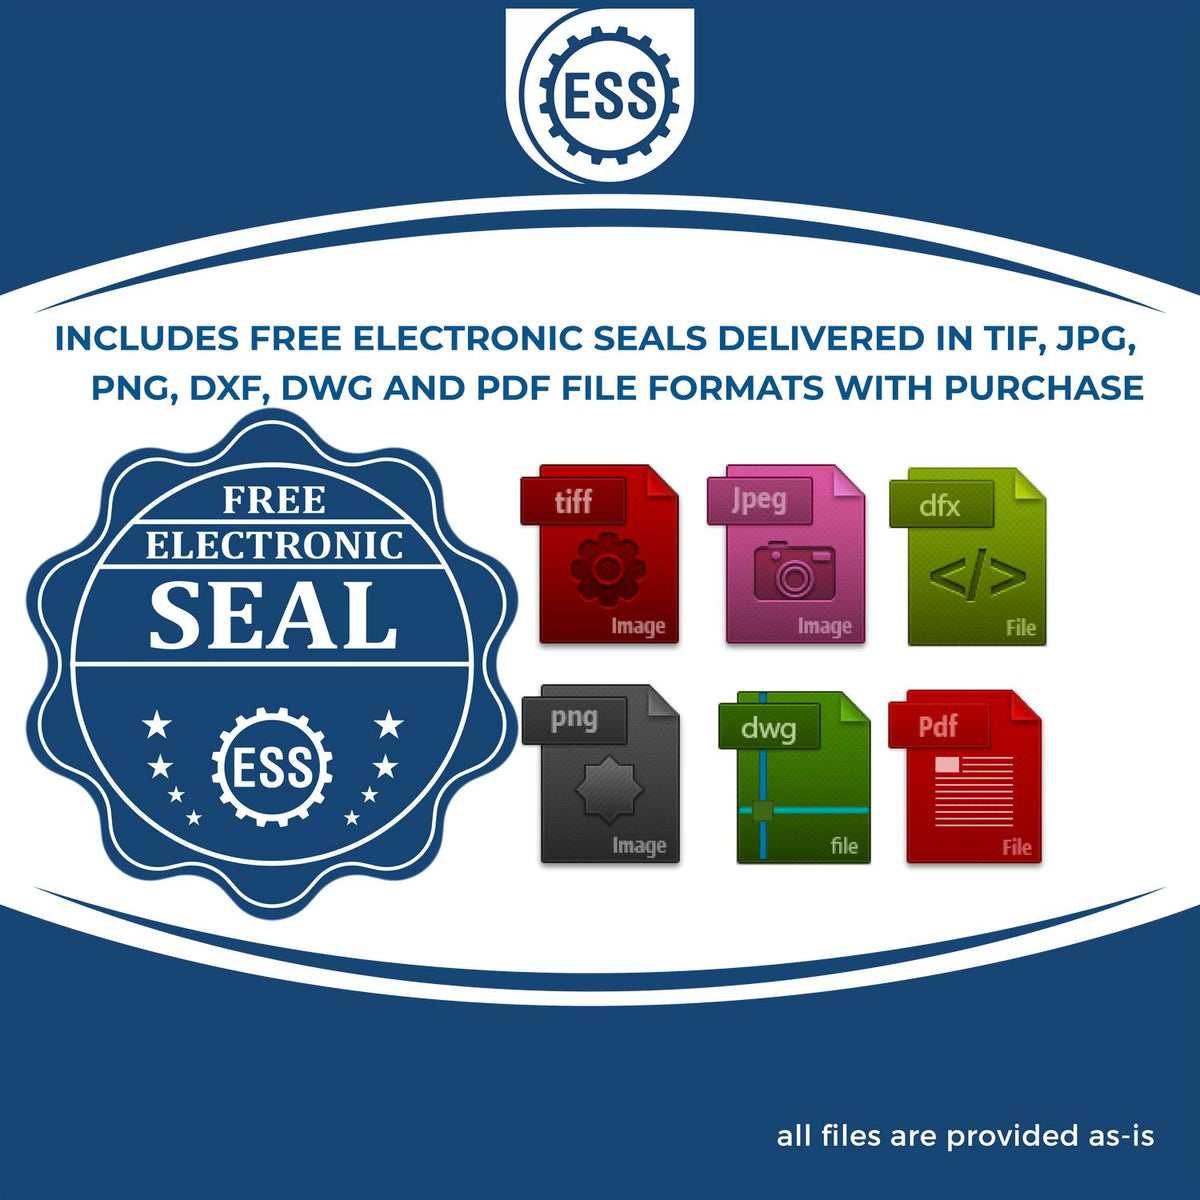 An infographic for the free electronic seal for the Long Reach Colorado Land Surveyor Seal illustrating the different file type icons such as DXF, DWG, TIF, JPG and PNG.